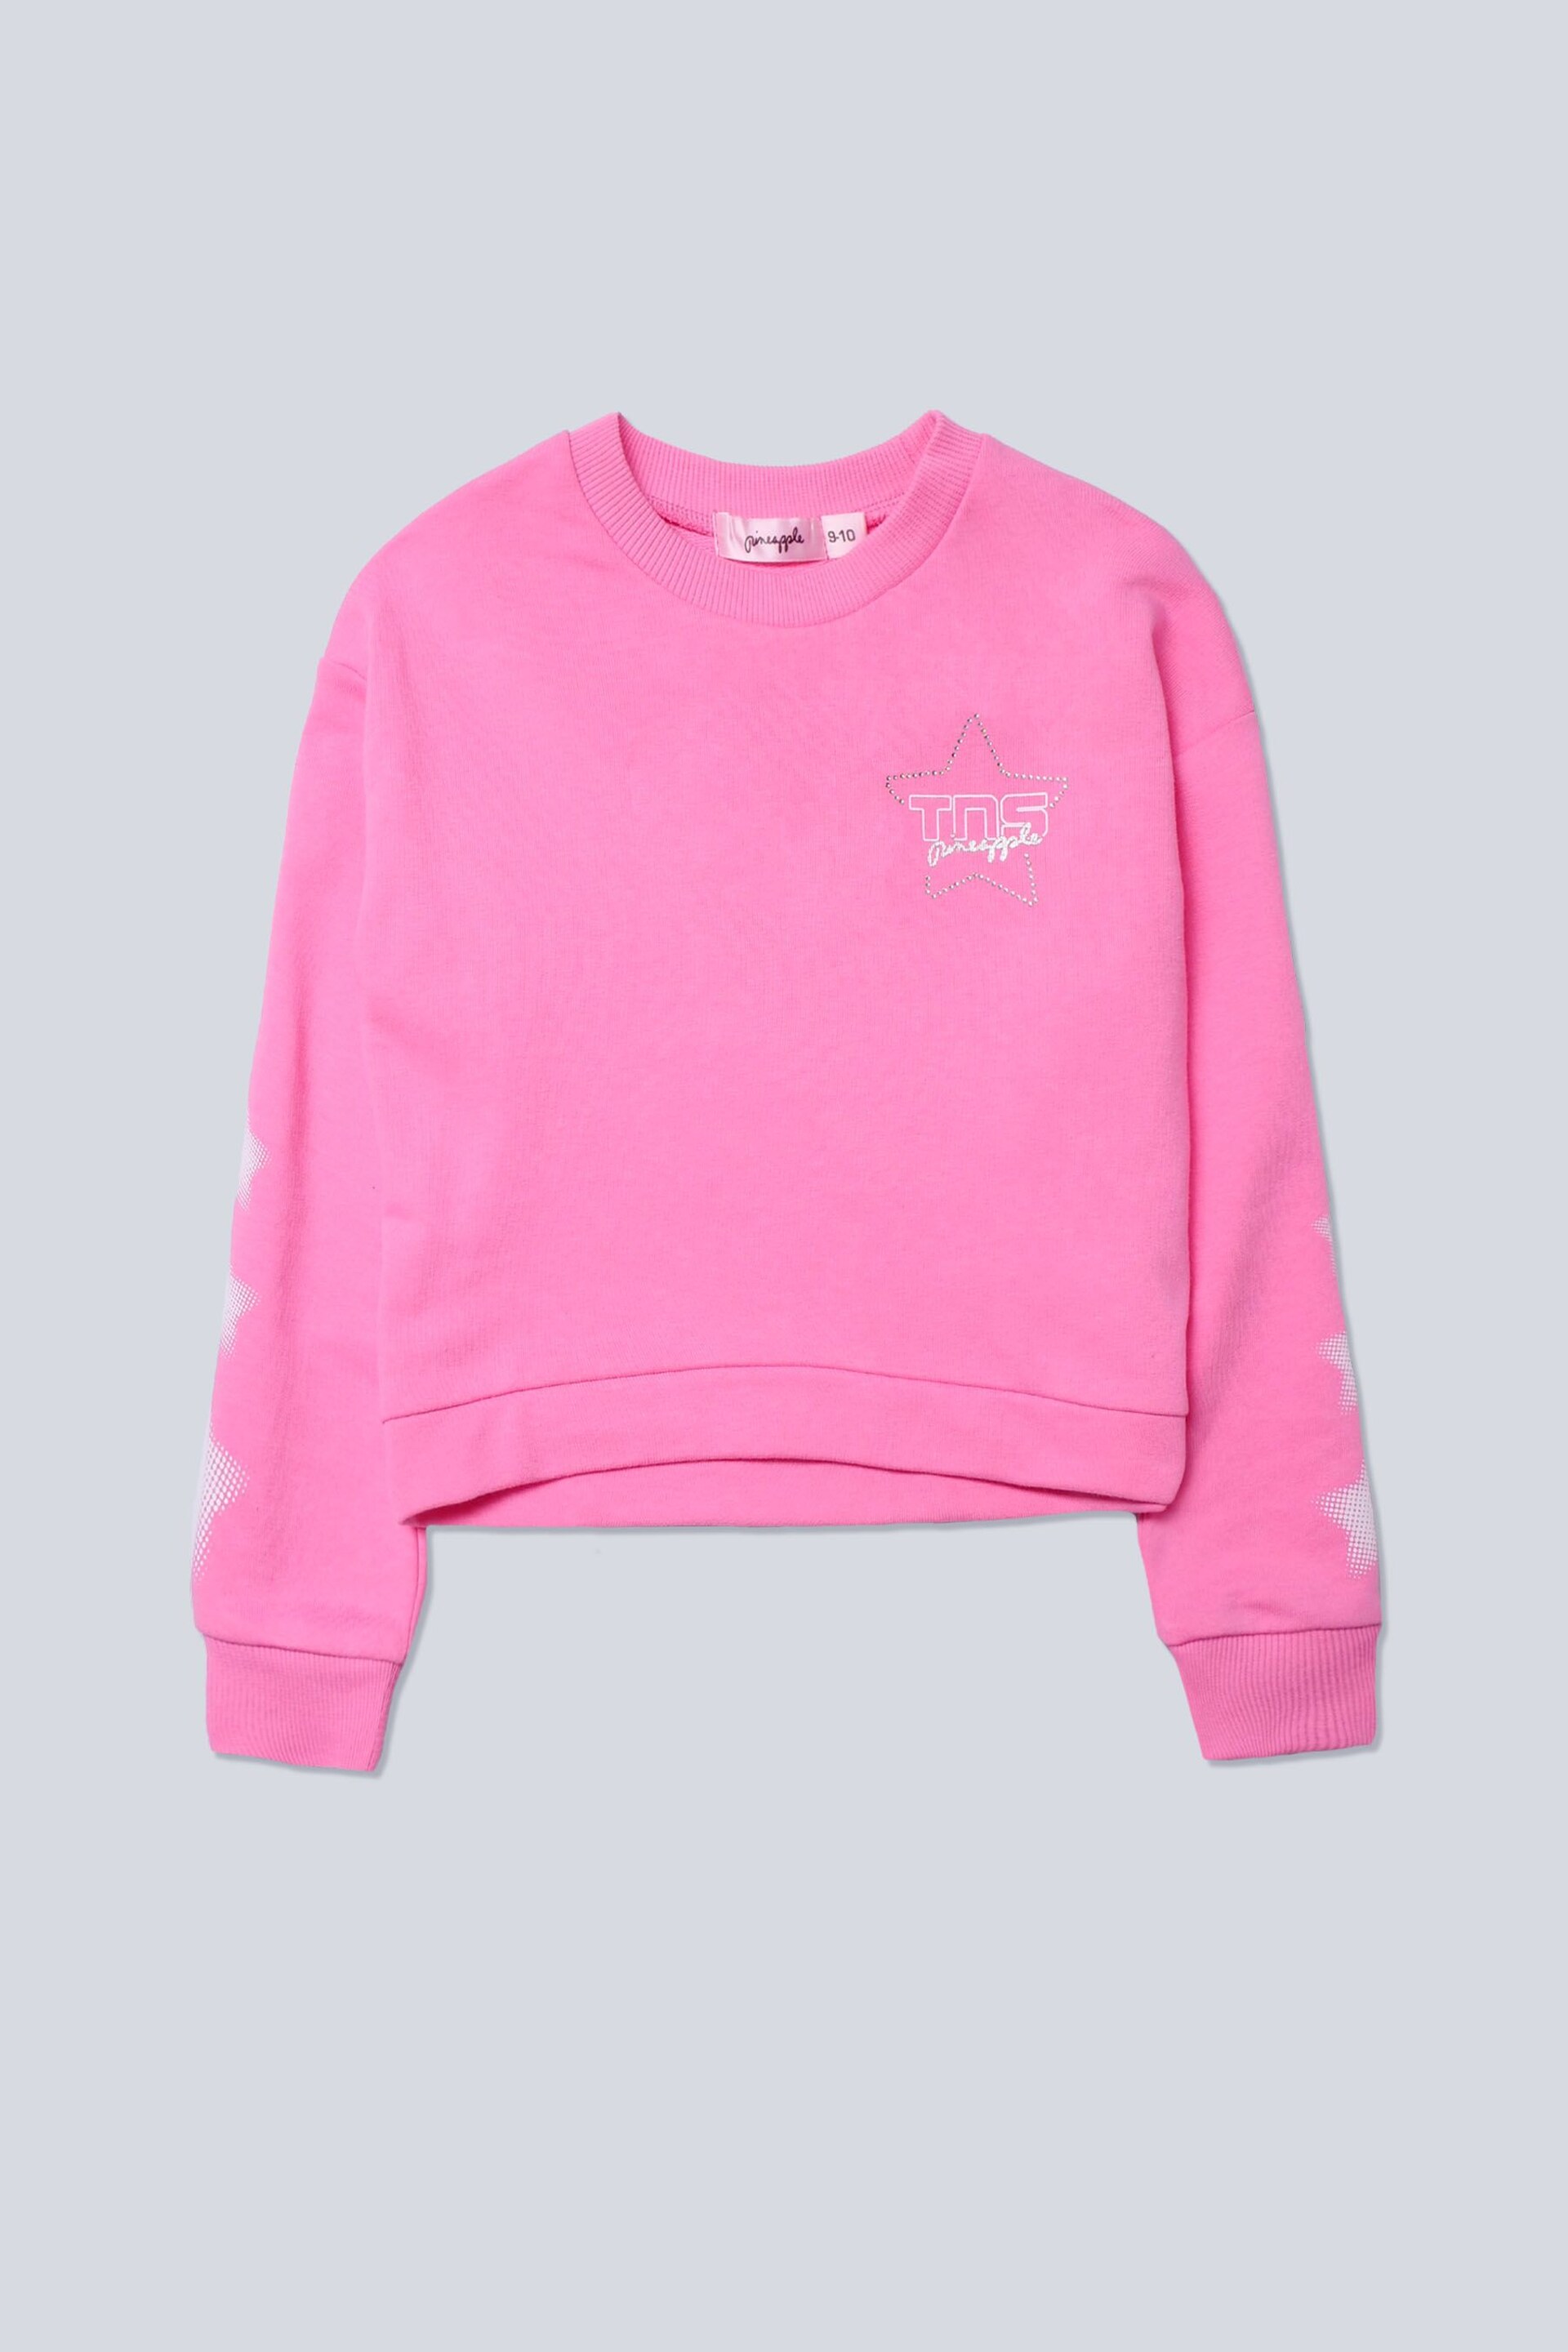 Pineapple Pink X The Next Step Sweater - Image 5 of 6